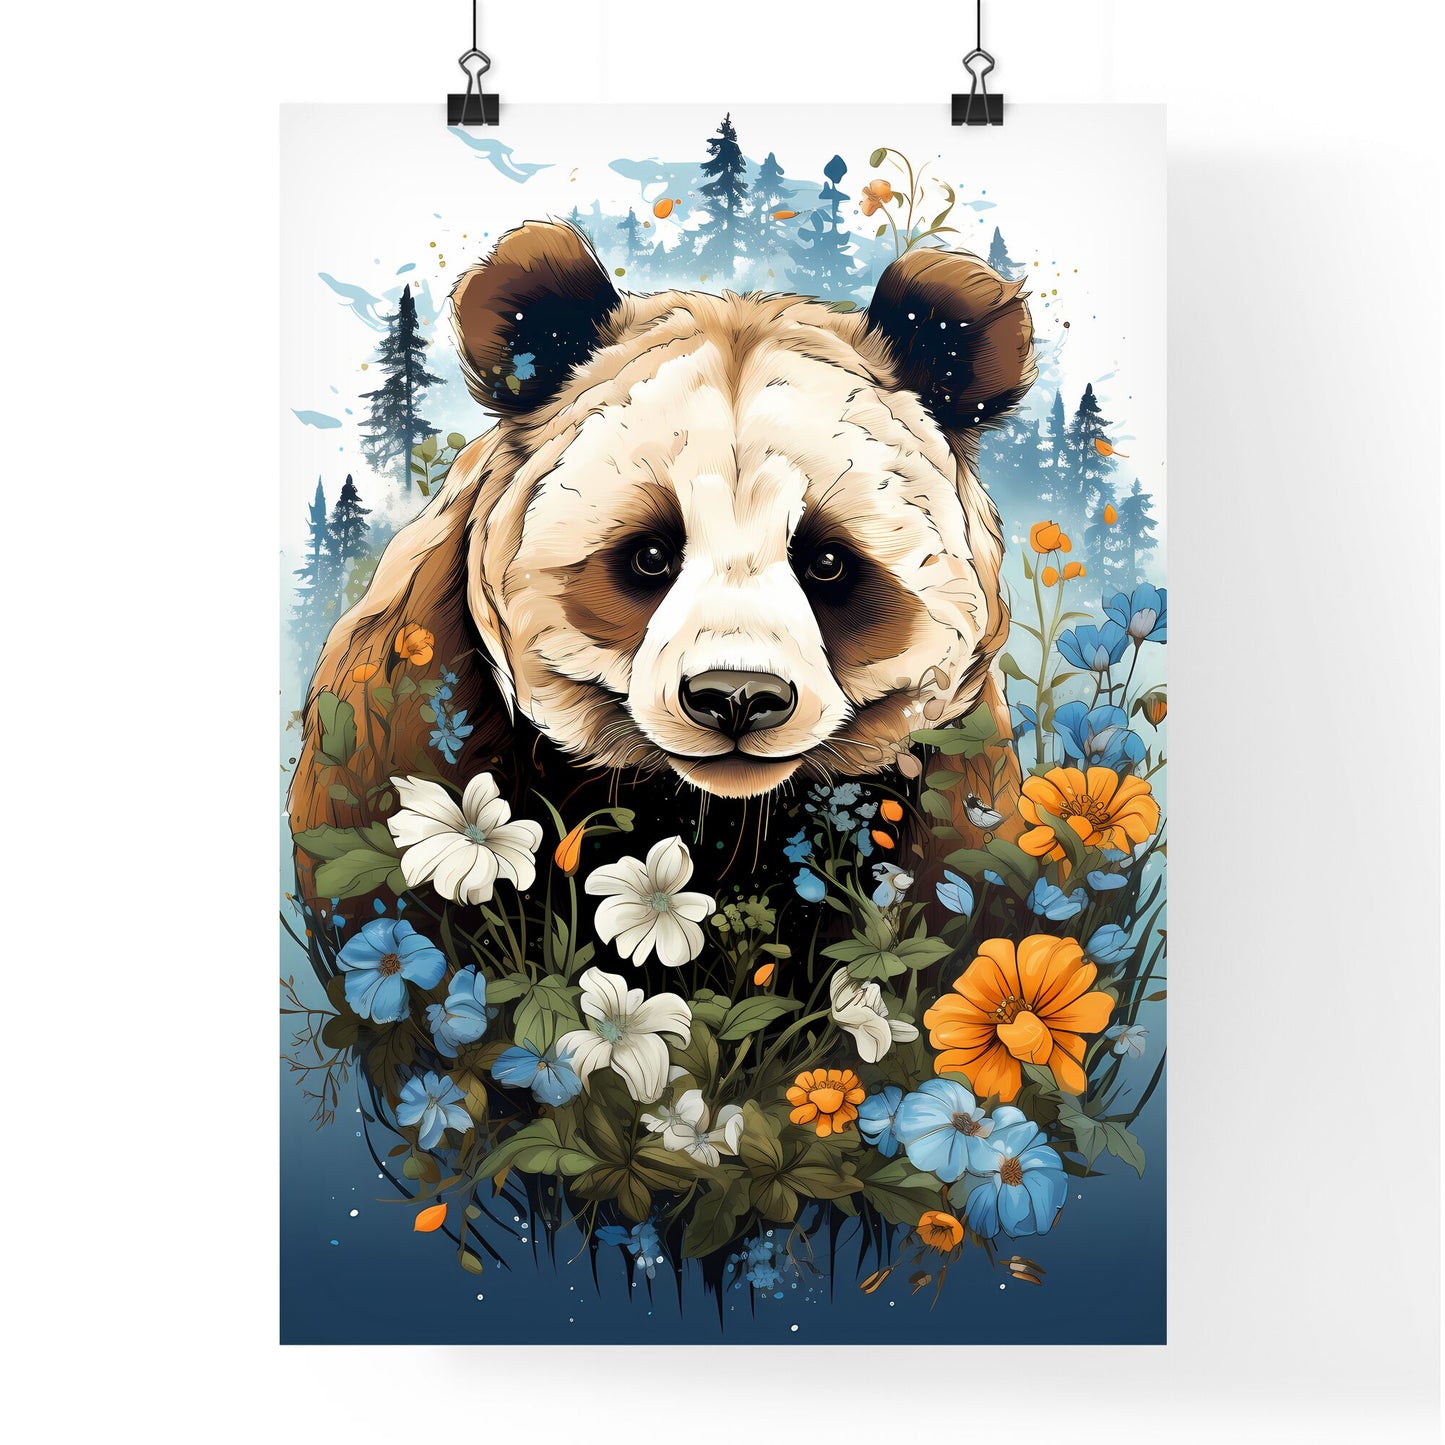 Bear Surrounded By Flowers Art Print Default Title